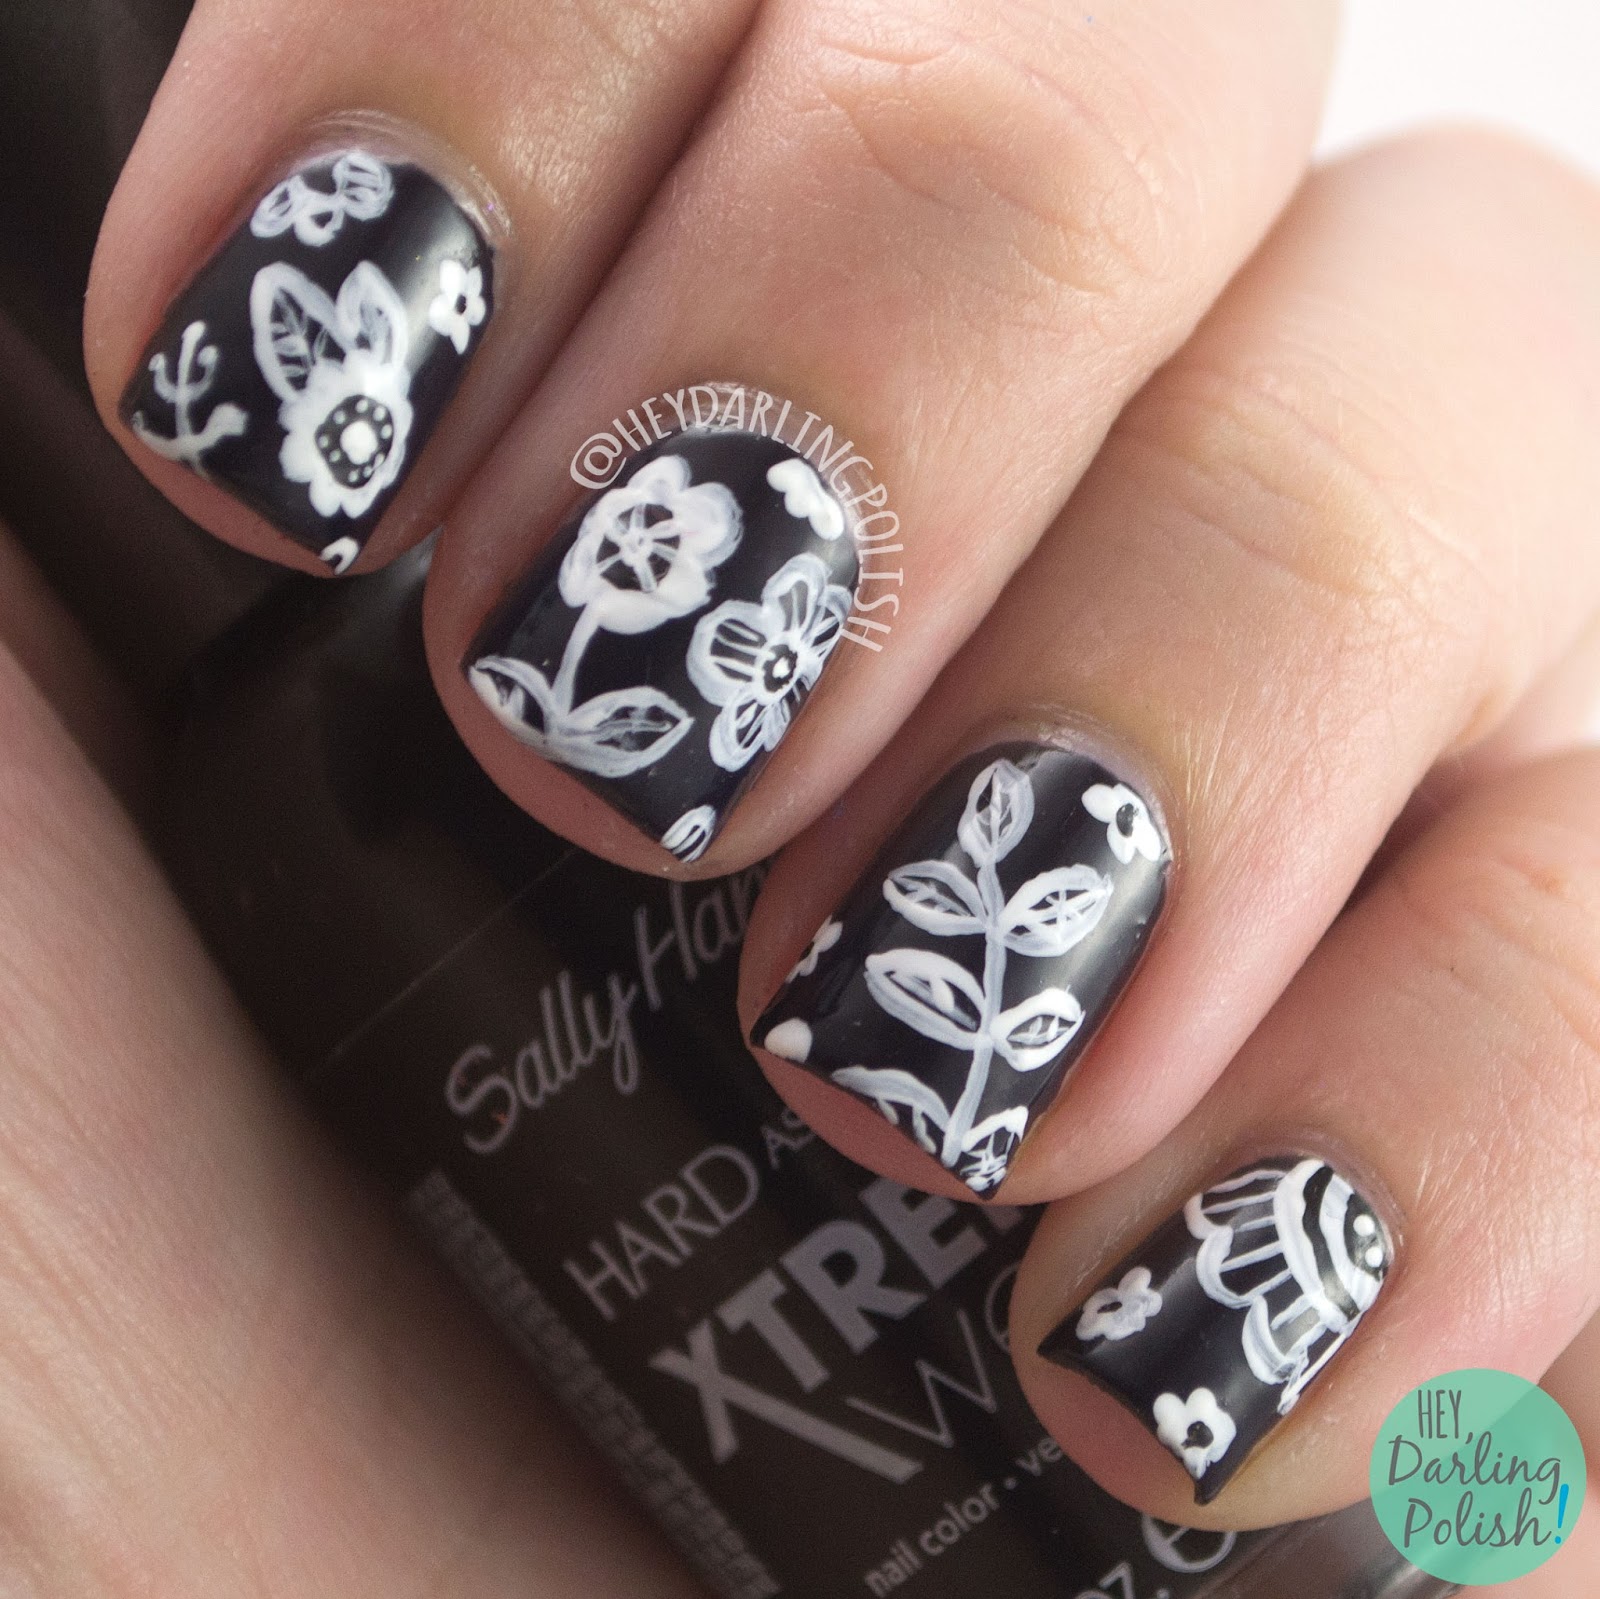 Hey, Darling Polish!: The Nail Art Guild: Black And White